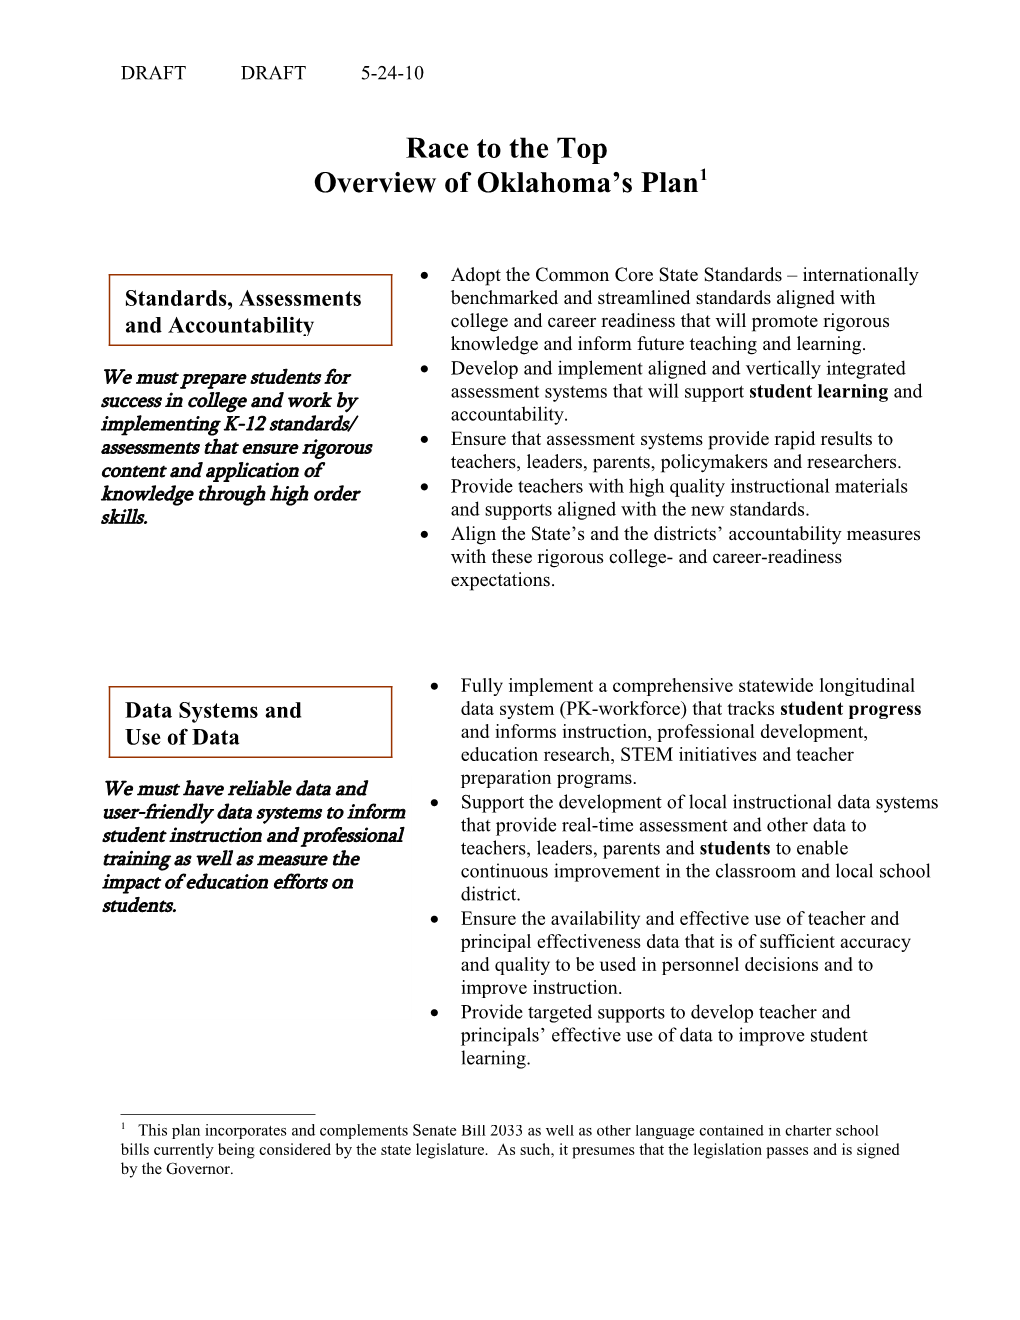 Race to the Top: Overview of Oklahoma's Plan